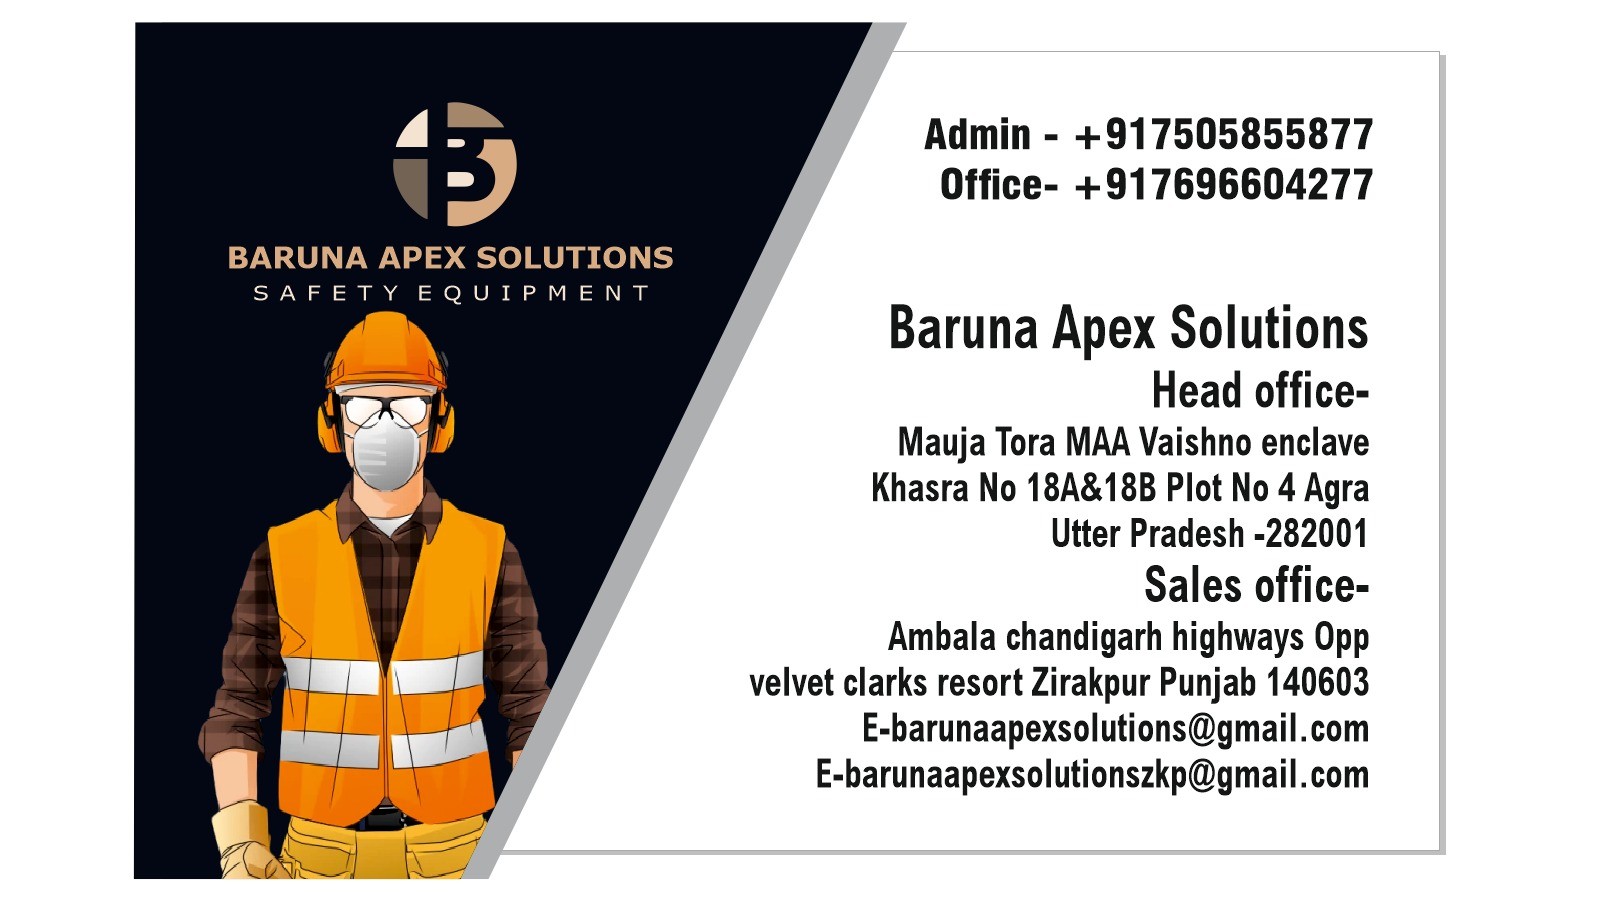 Safety equipment and transport services